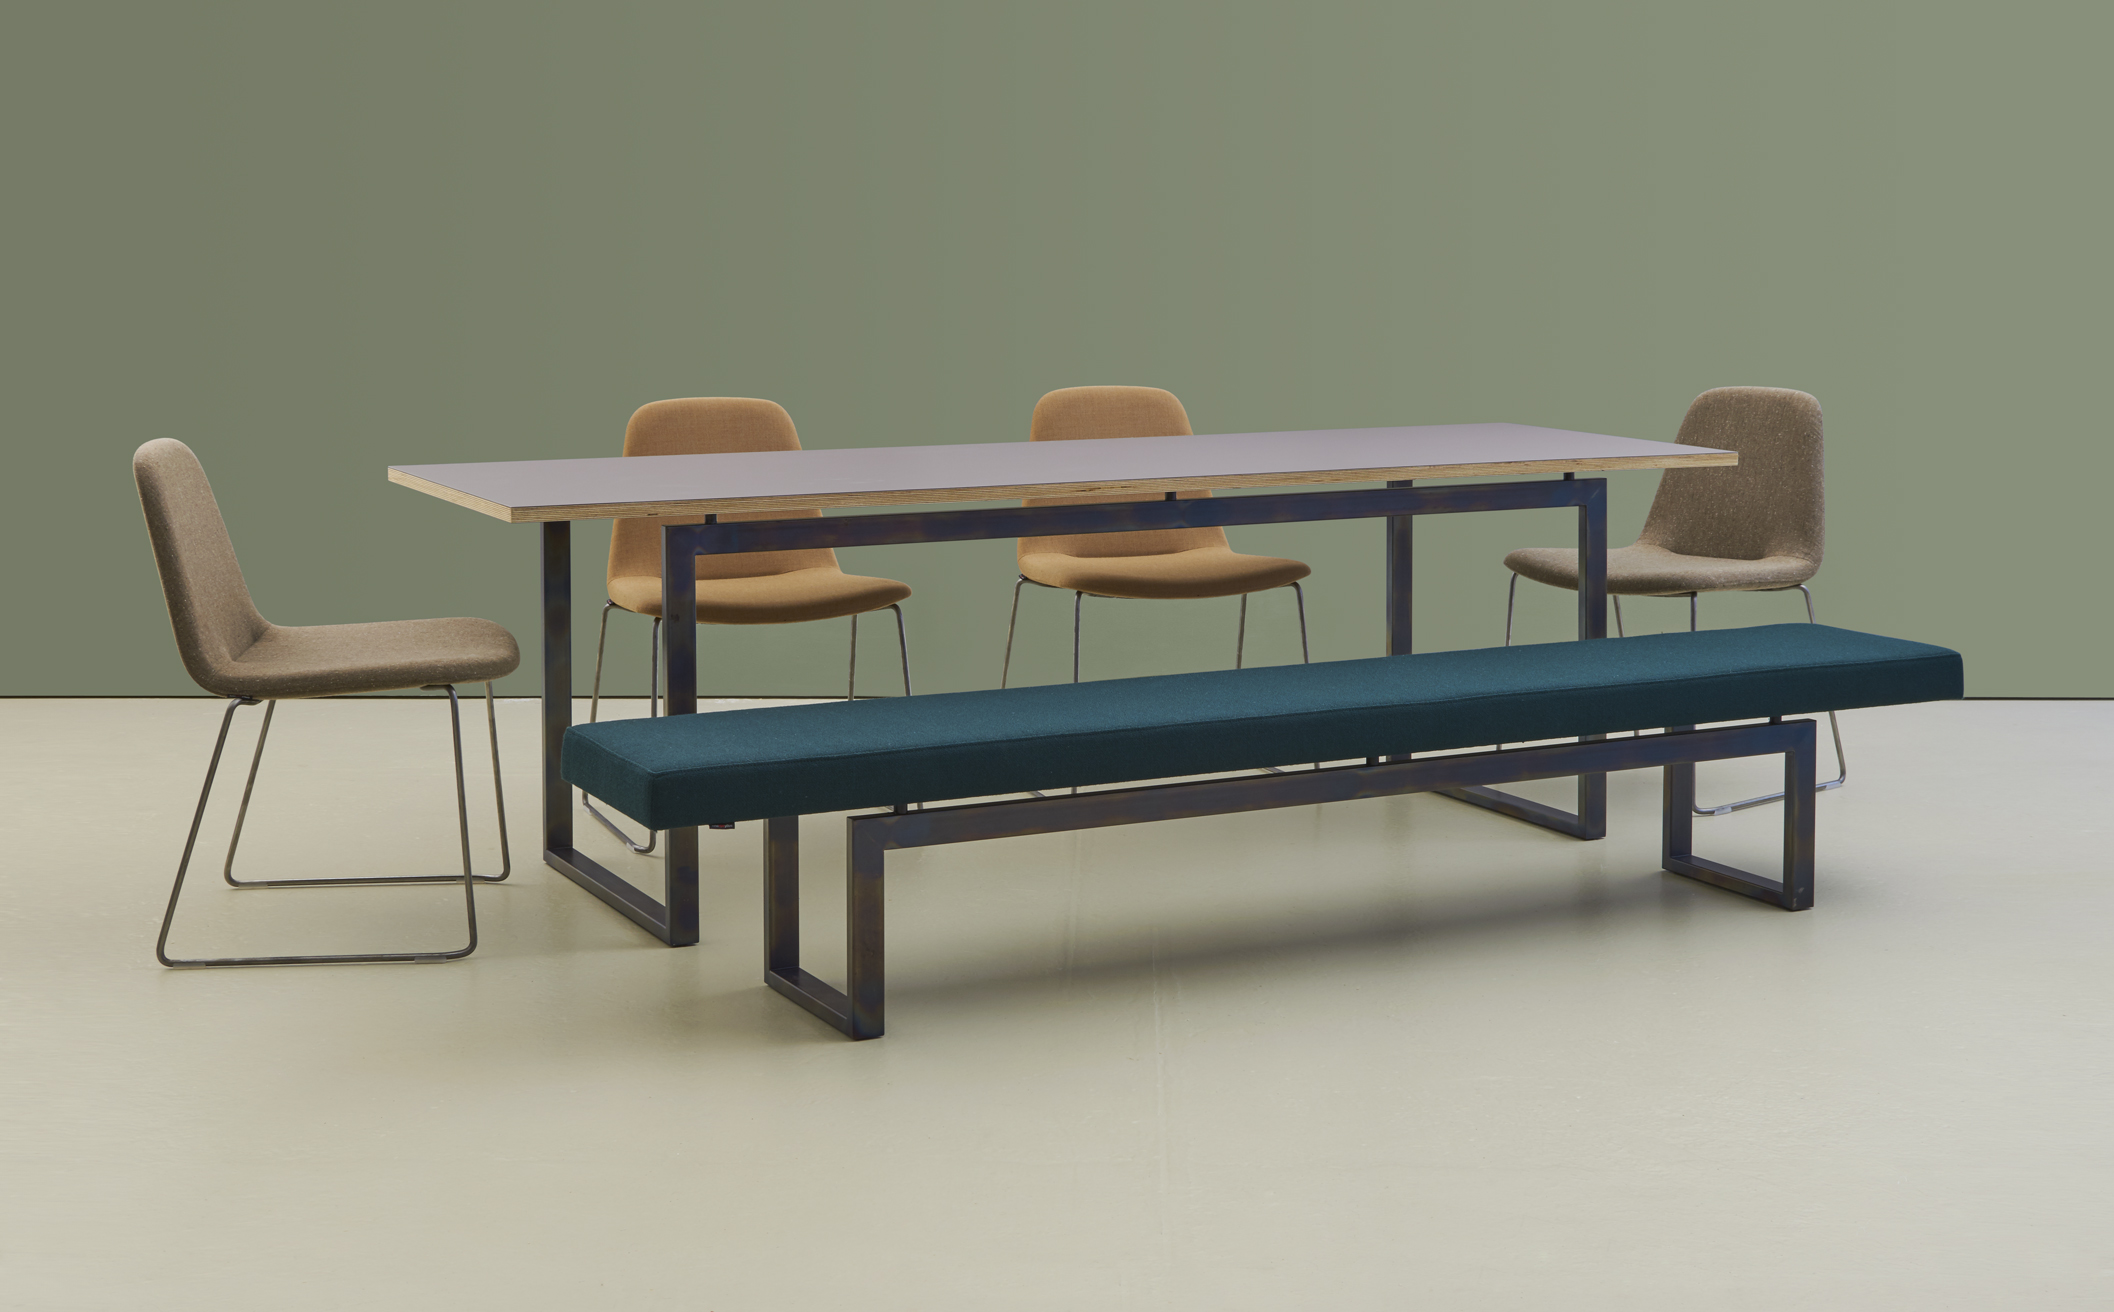 hm107c with hm106c bench and hm58a chairs in laquered raw steel (low res).jpg